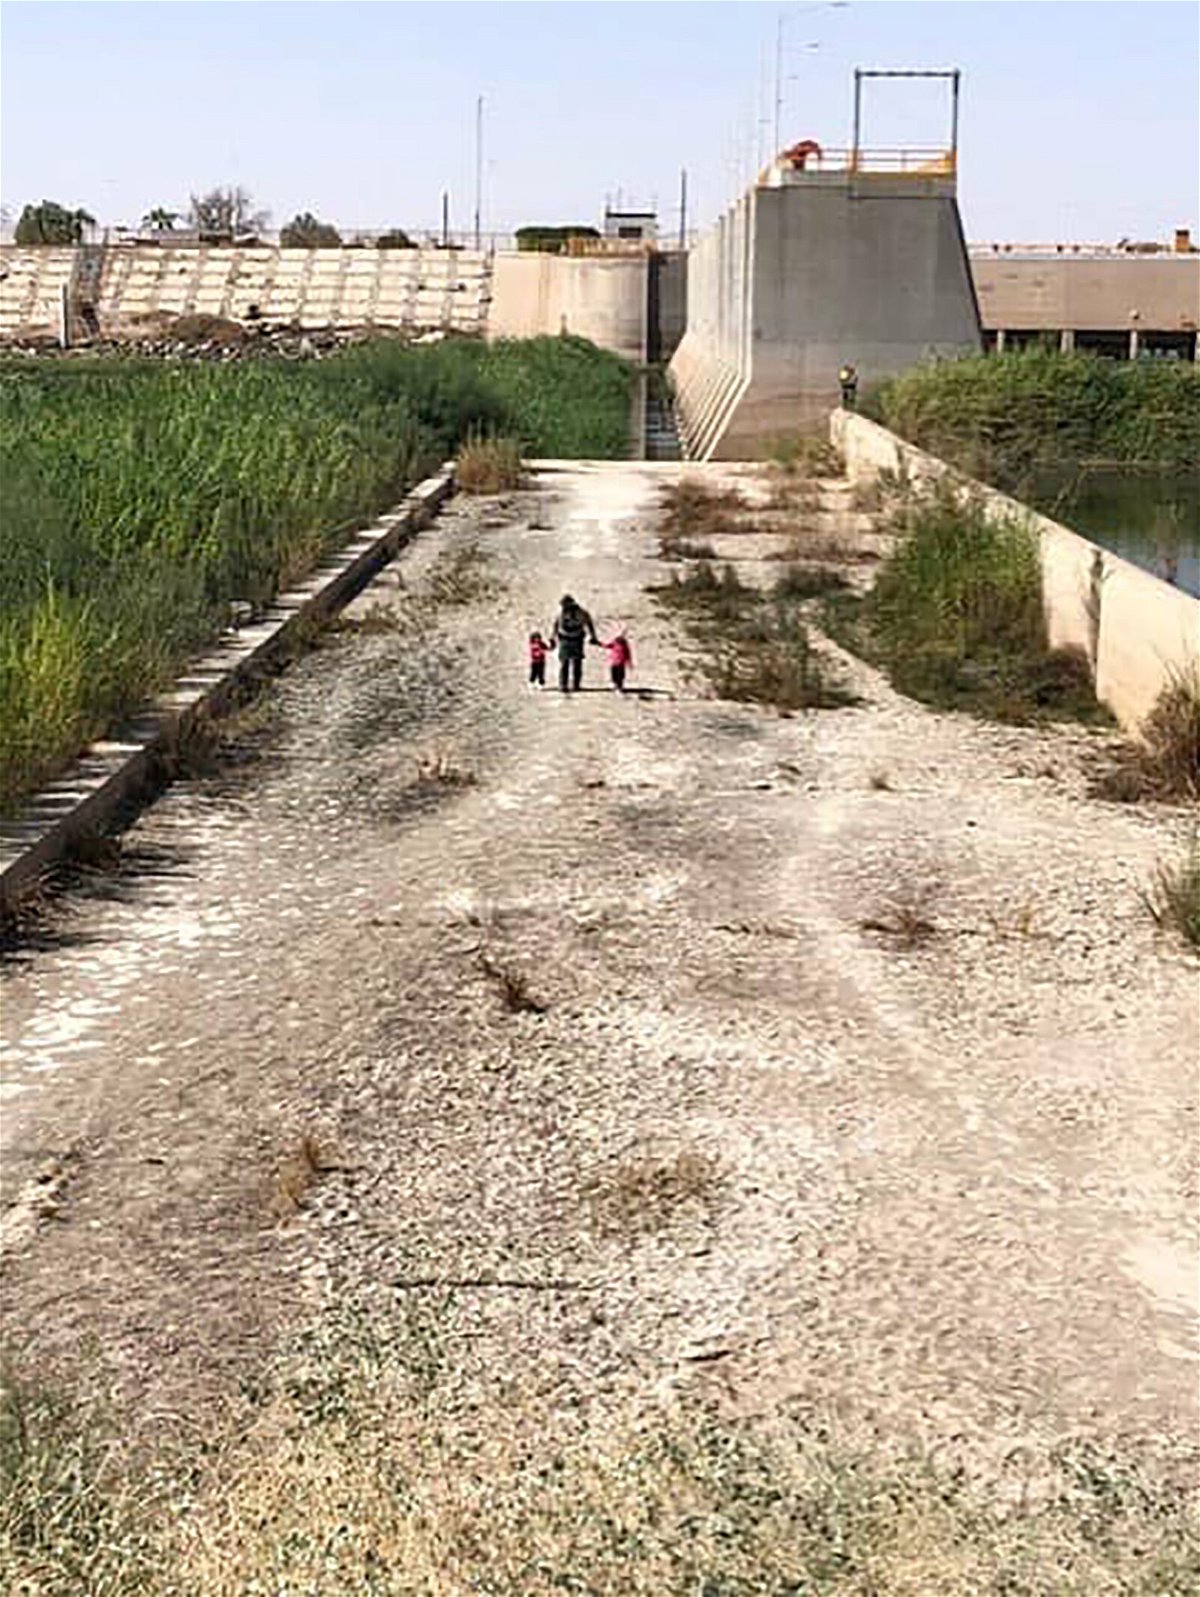 <i>US Border Patrol</i><br/>A US Border Patrol agent is seen walking with two young sisters found on October 12